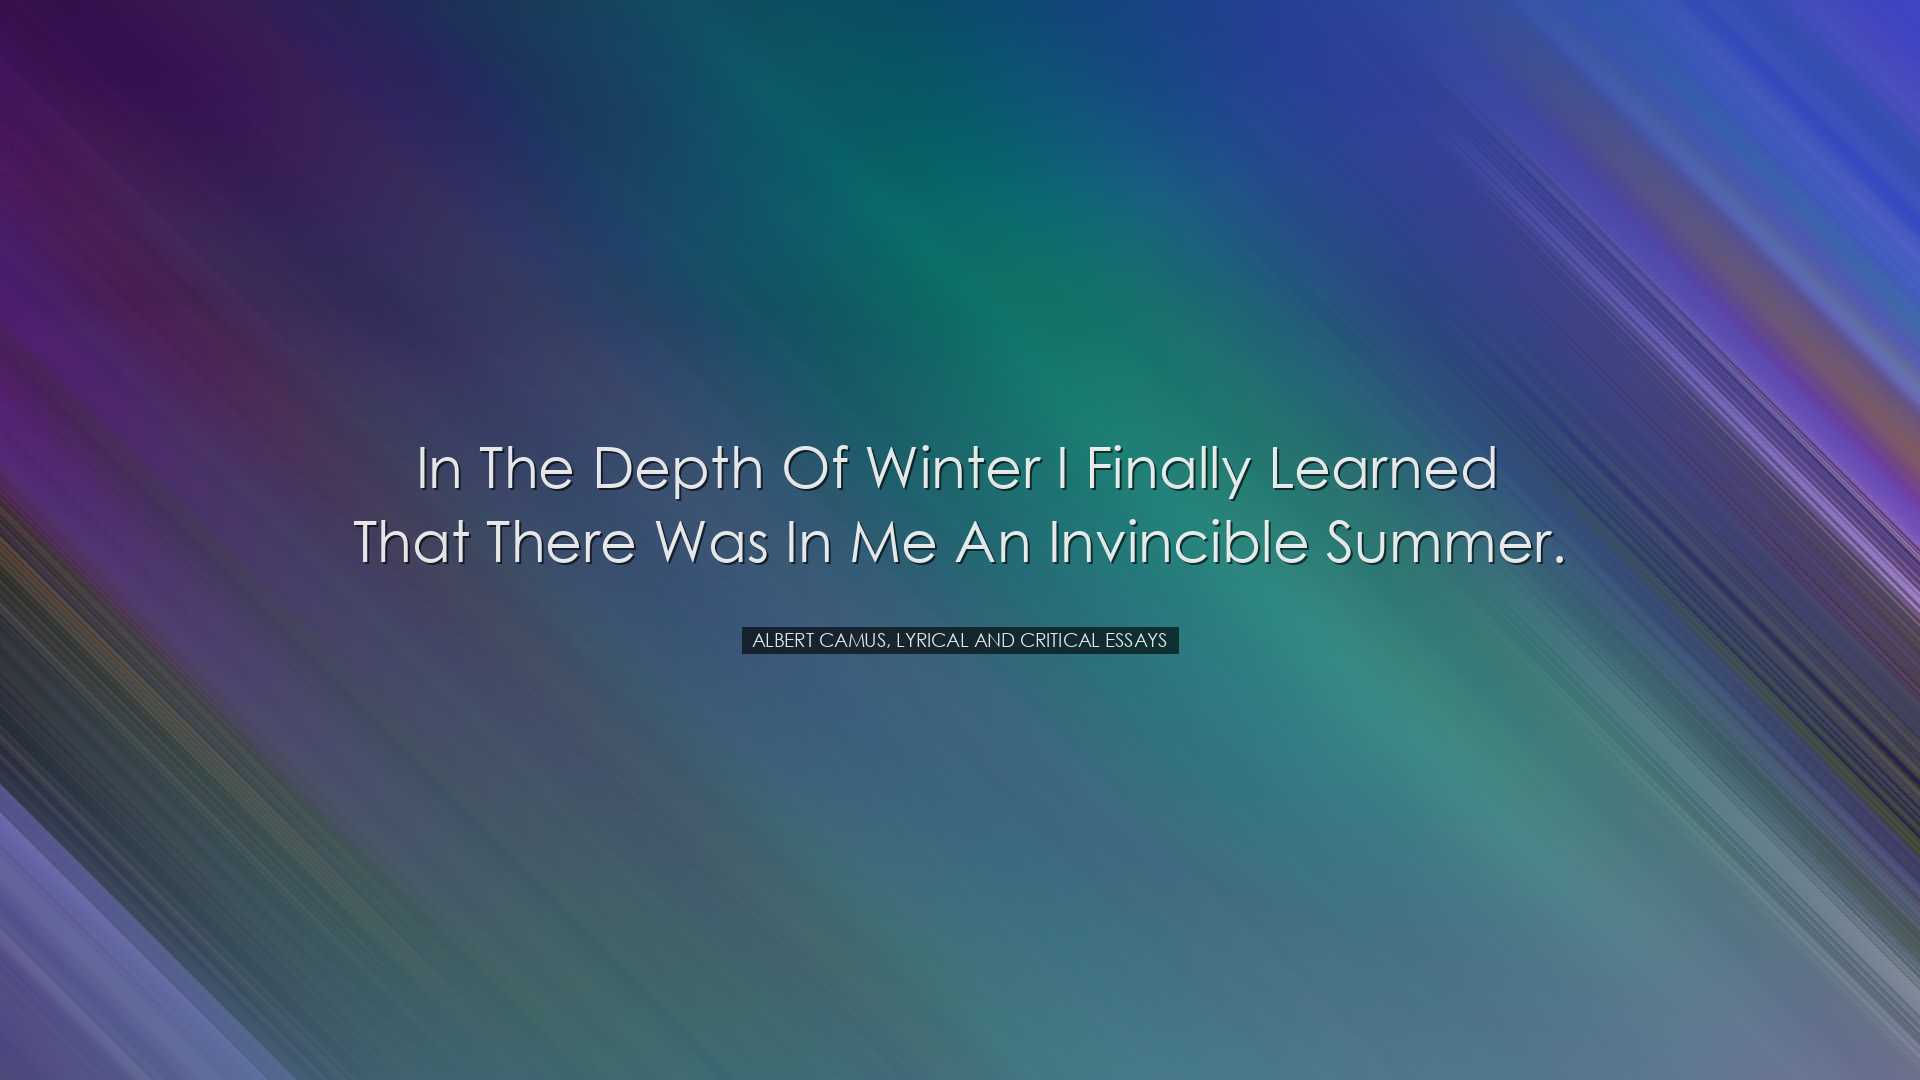 In the depth of winter I finally learned that there was in me an i